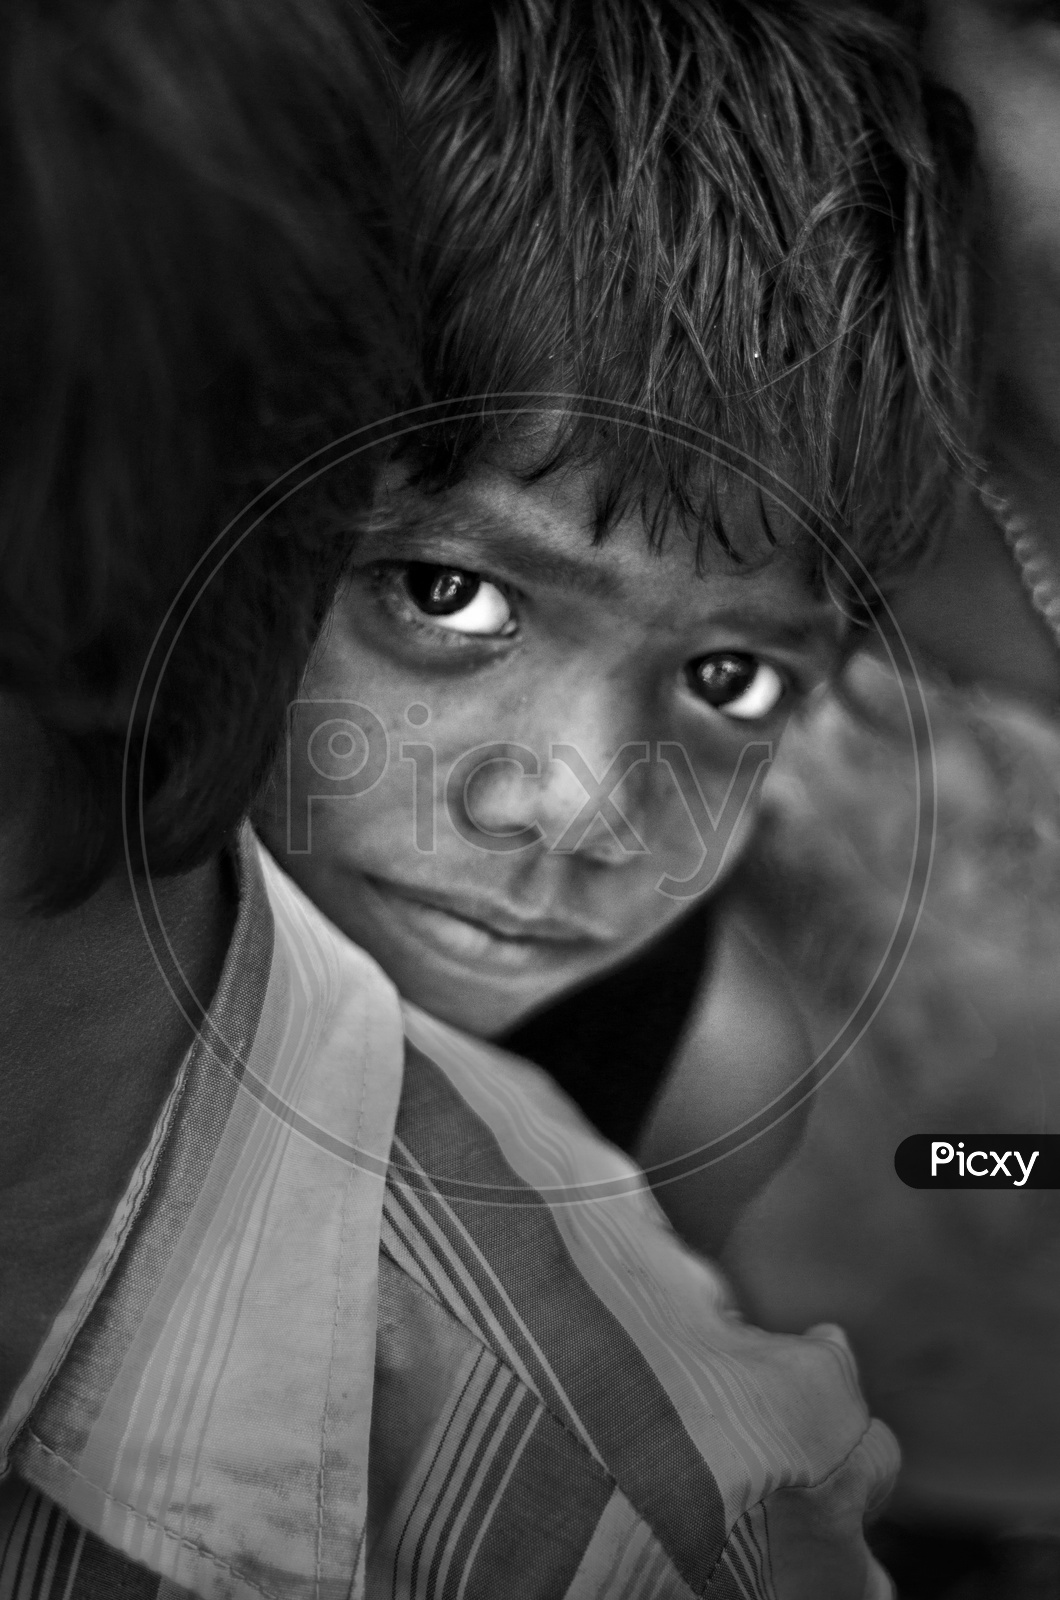 A child's eyes showing innocence